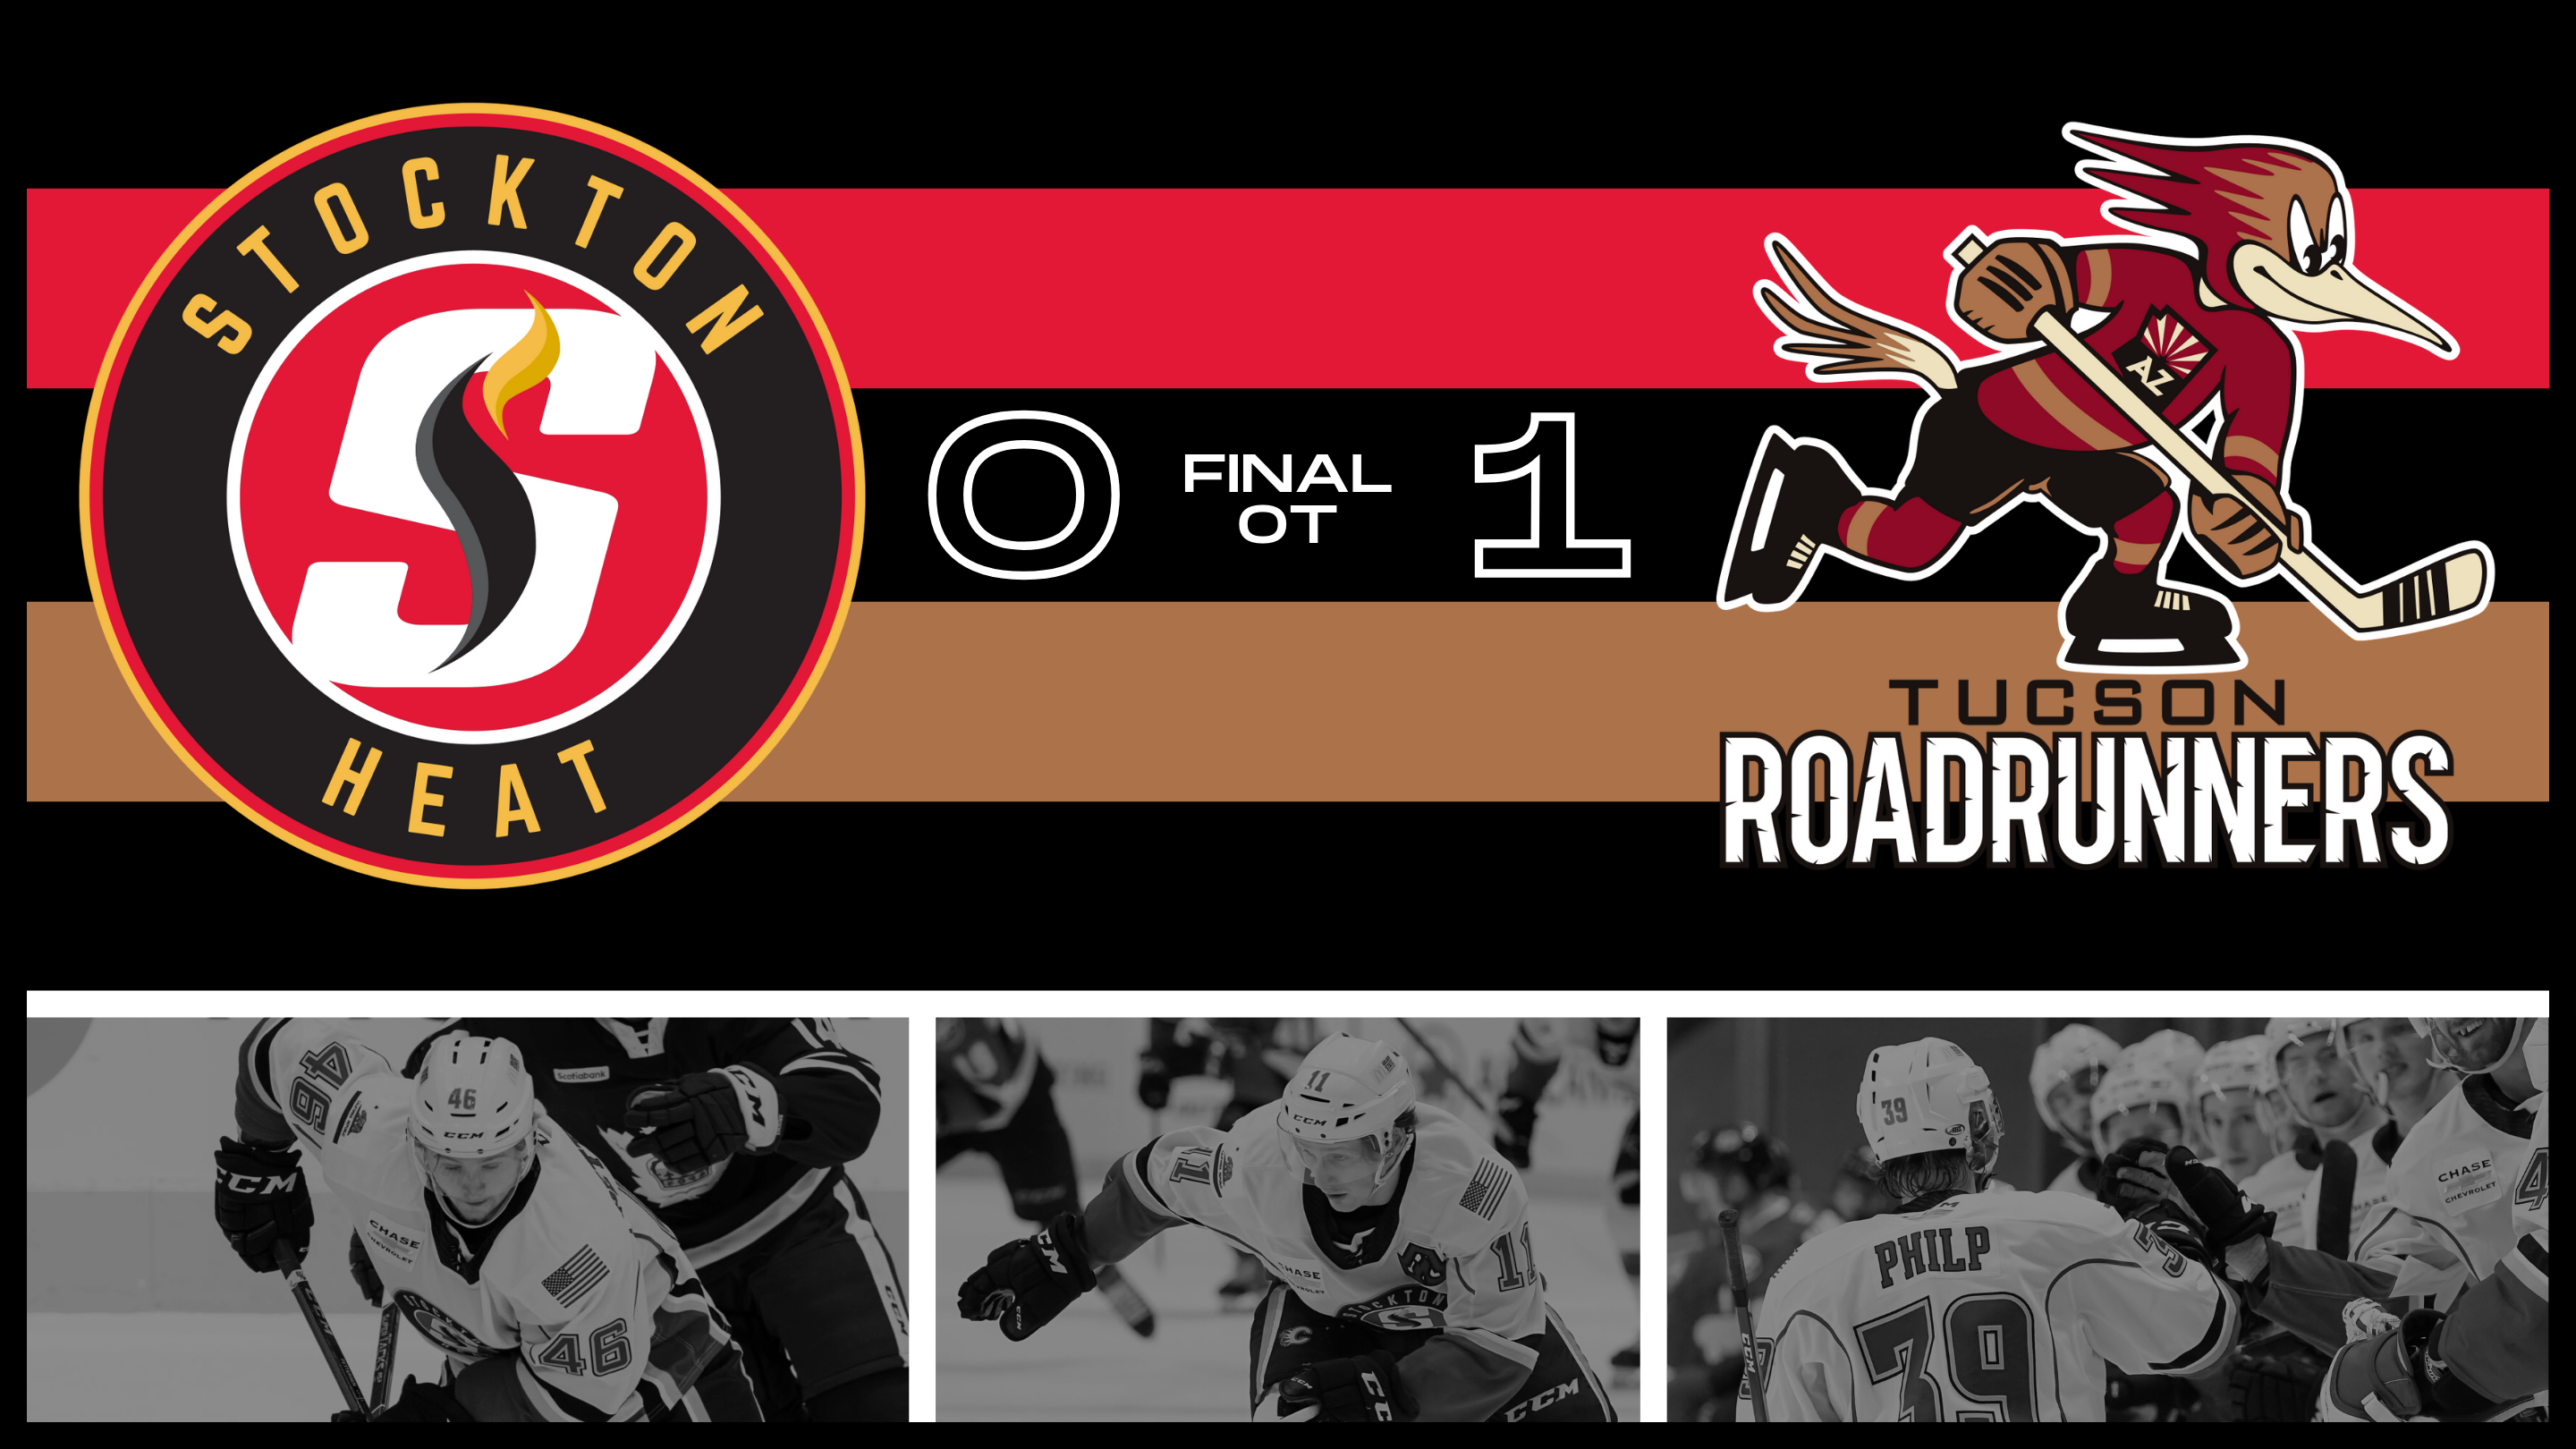 Tucson Roadrunners return home for series with Stockton Heat